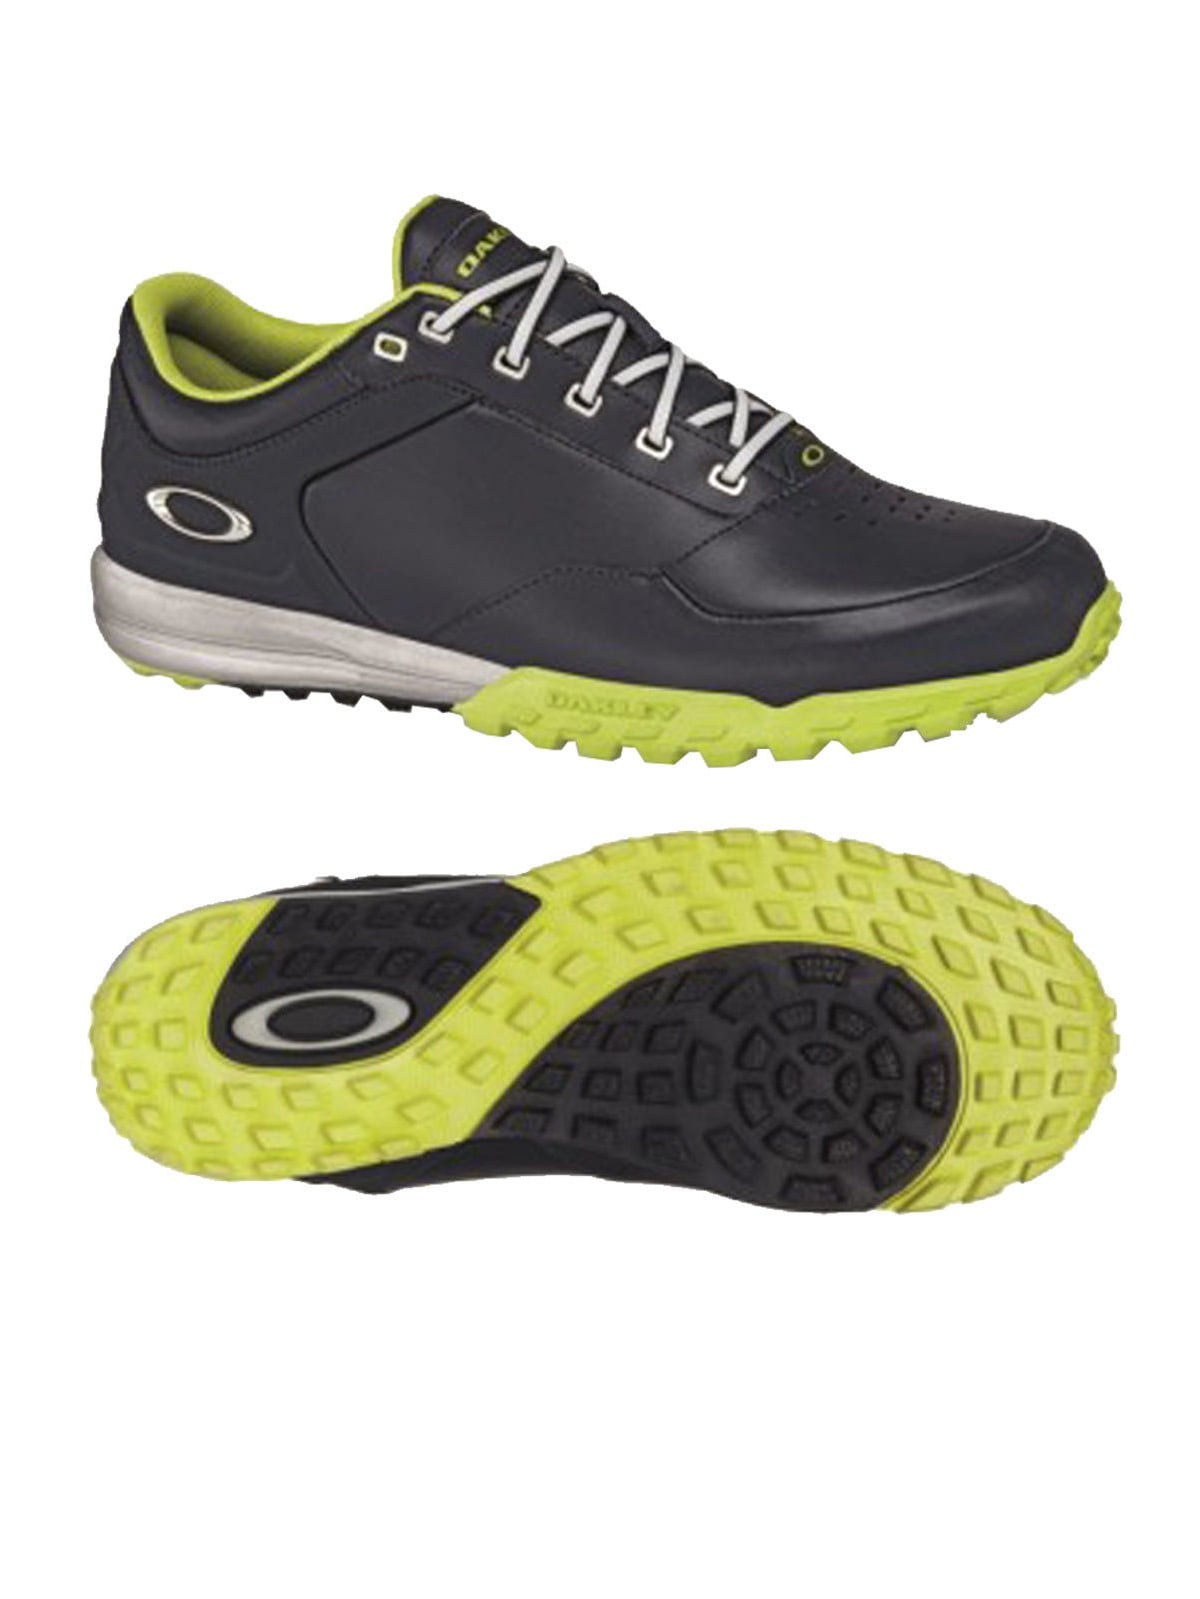 oakley golf shoes clearance